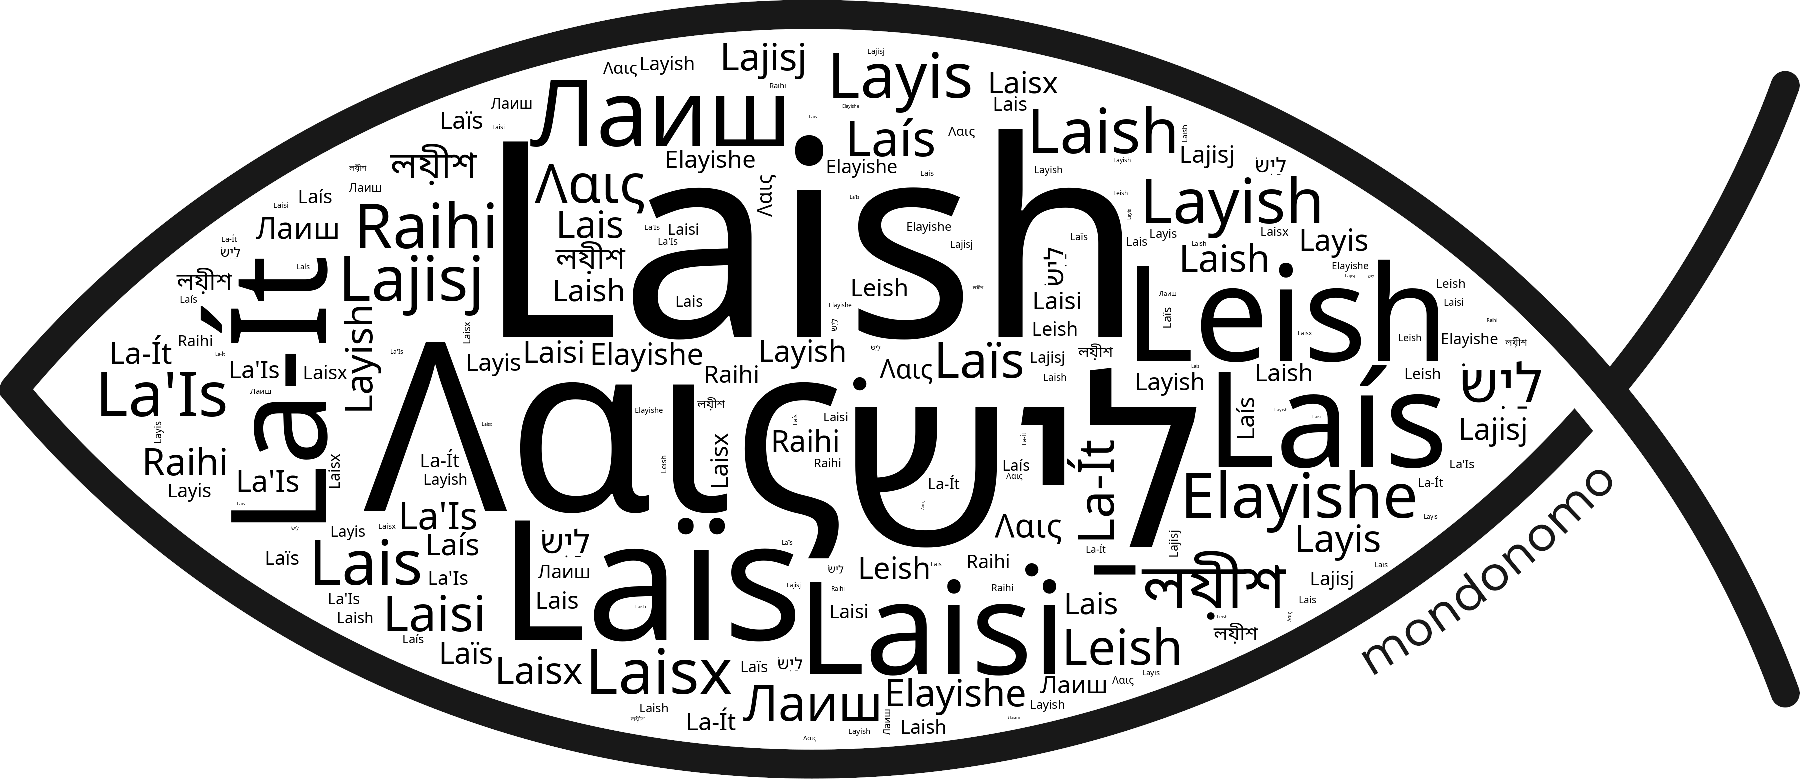 Name Laish in the world's Bibles